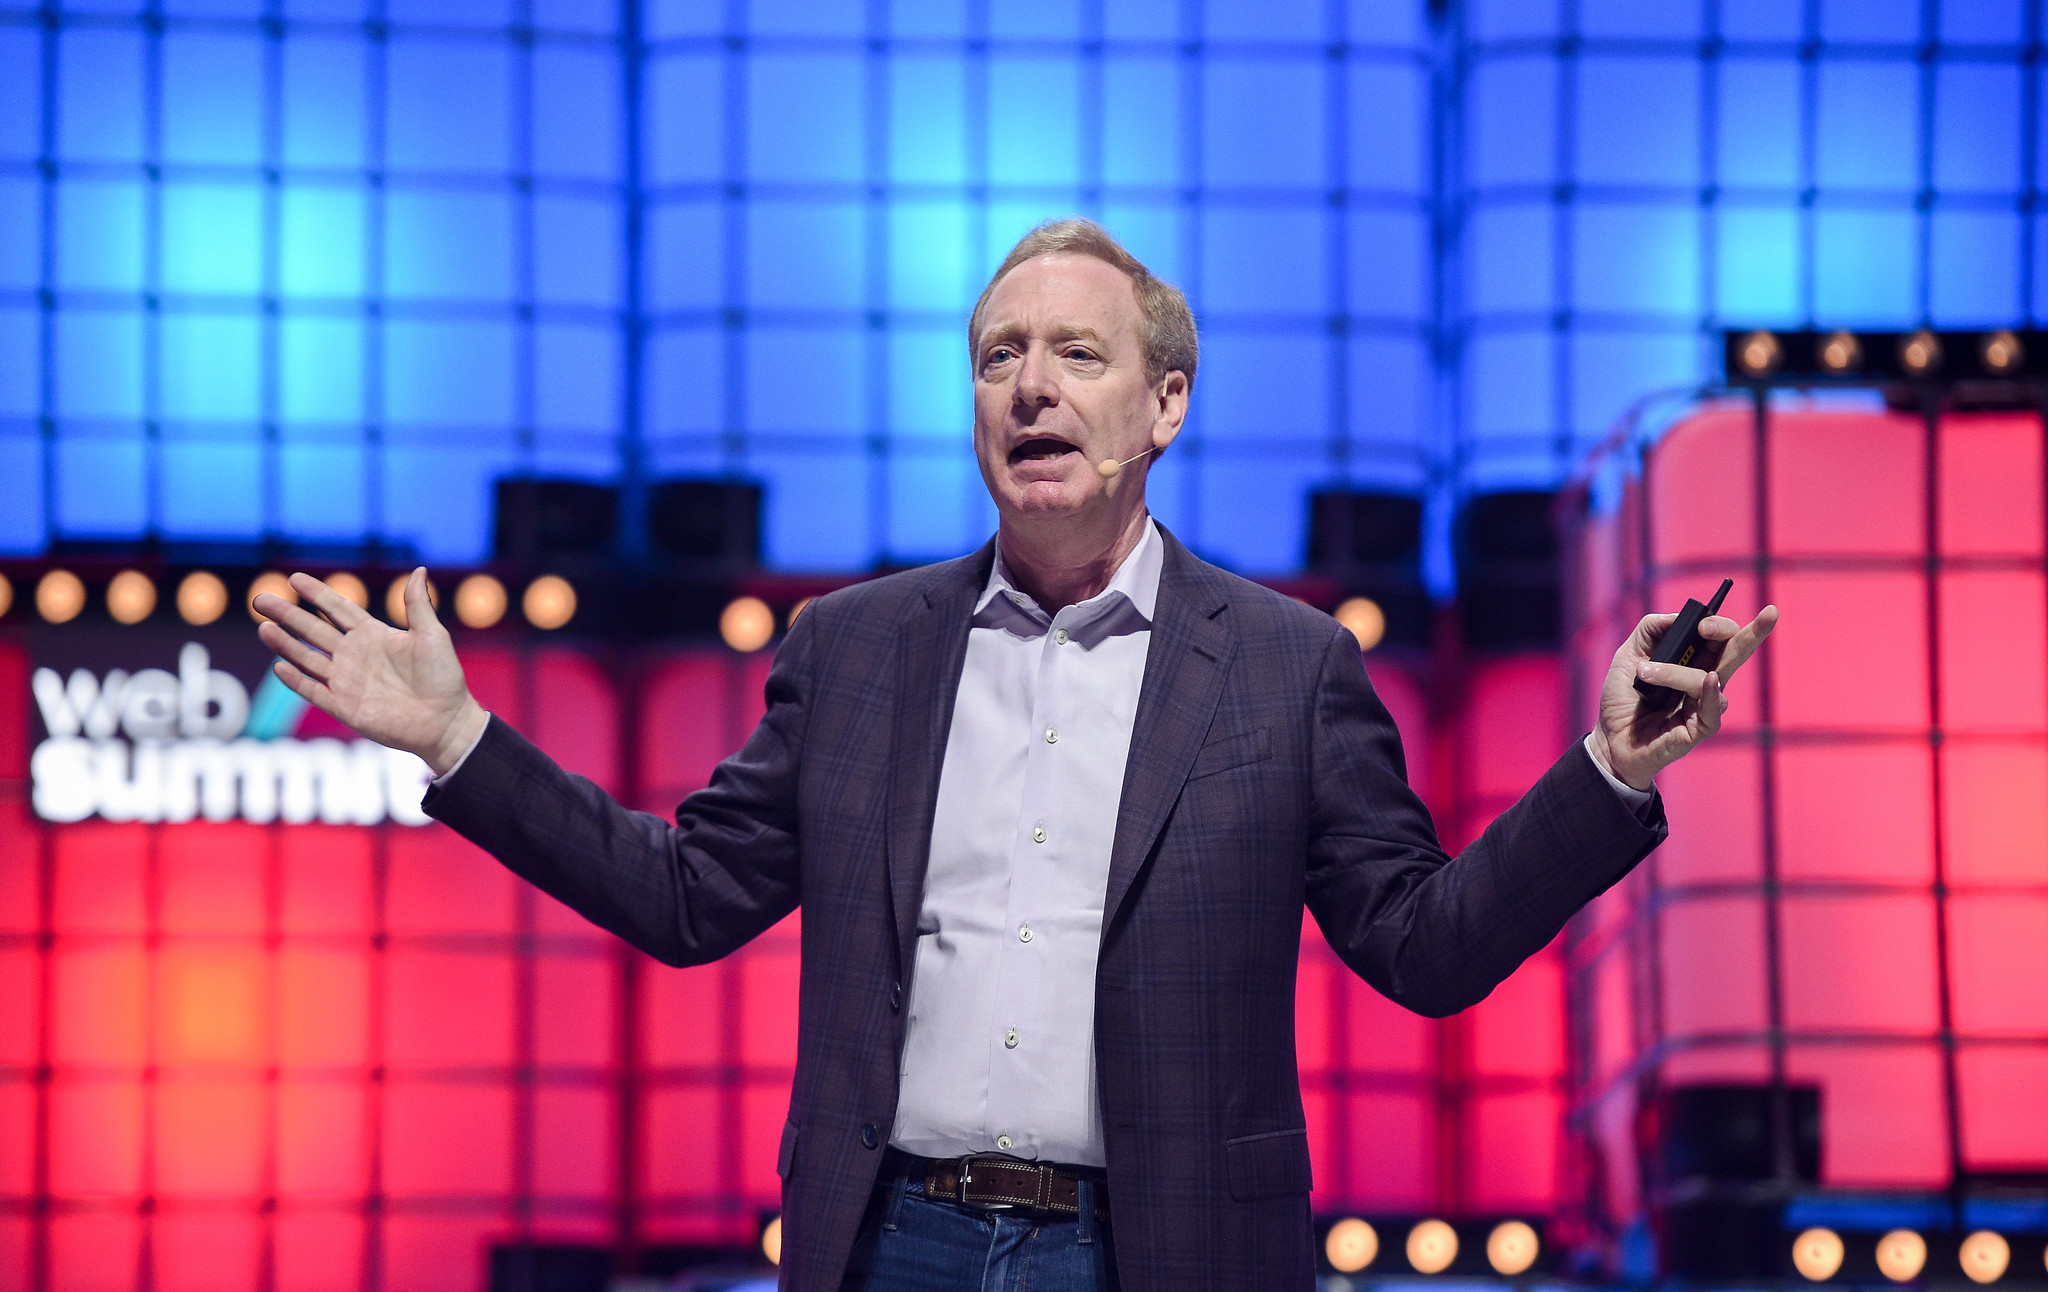 Brad Smith, President, Microsoft, on Centre Stage during day two of Web Summit 2019